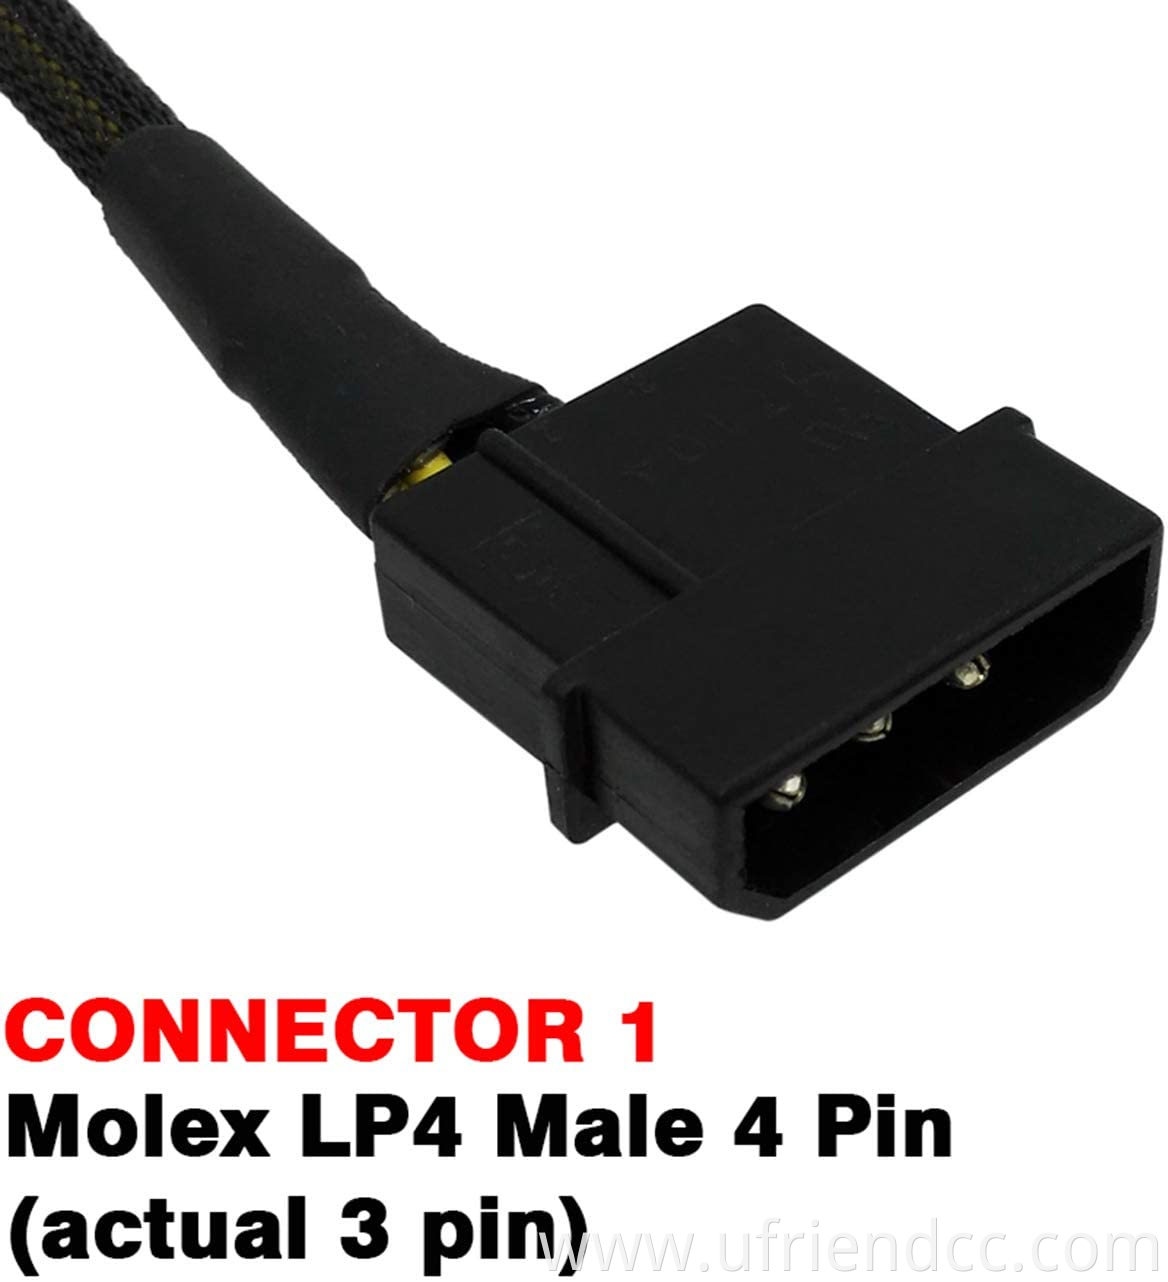 4 Pin Molex IDE Male to Female Extension Adapter Cable